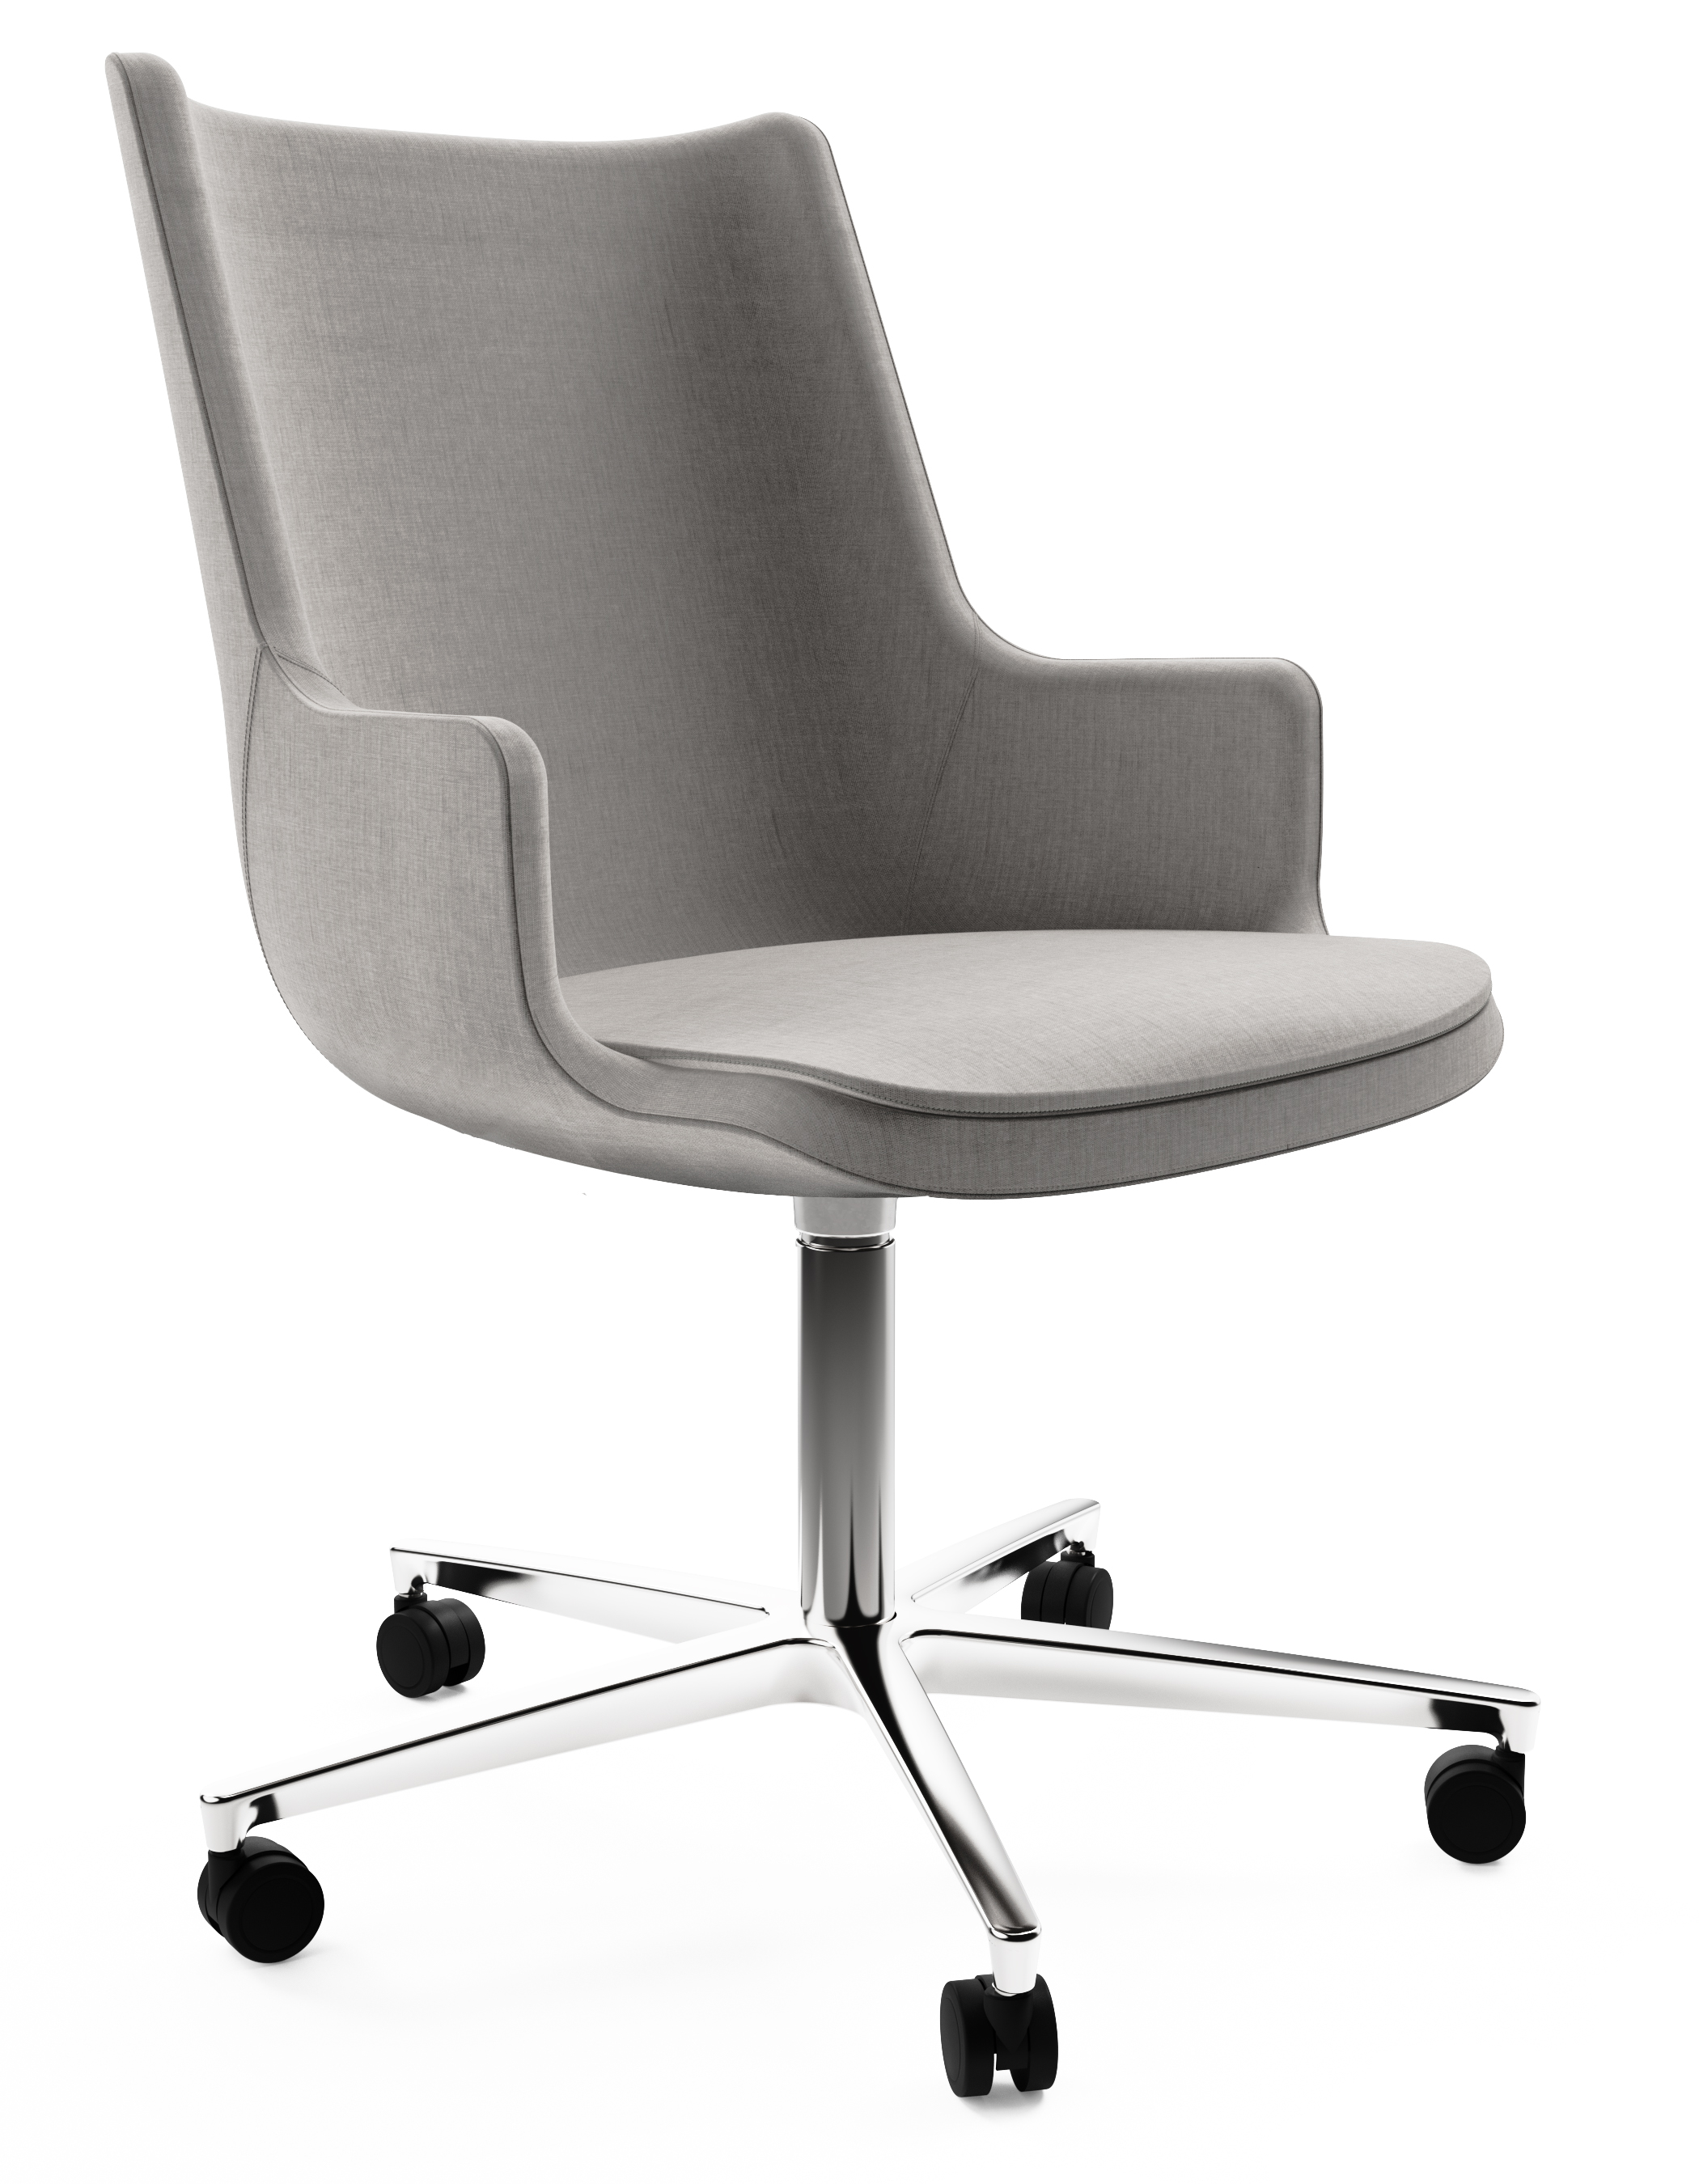 WS - Contour chair - Mid, 5 star castor polished base (Front angle)